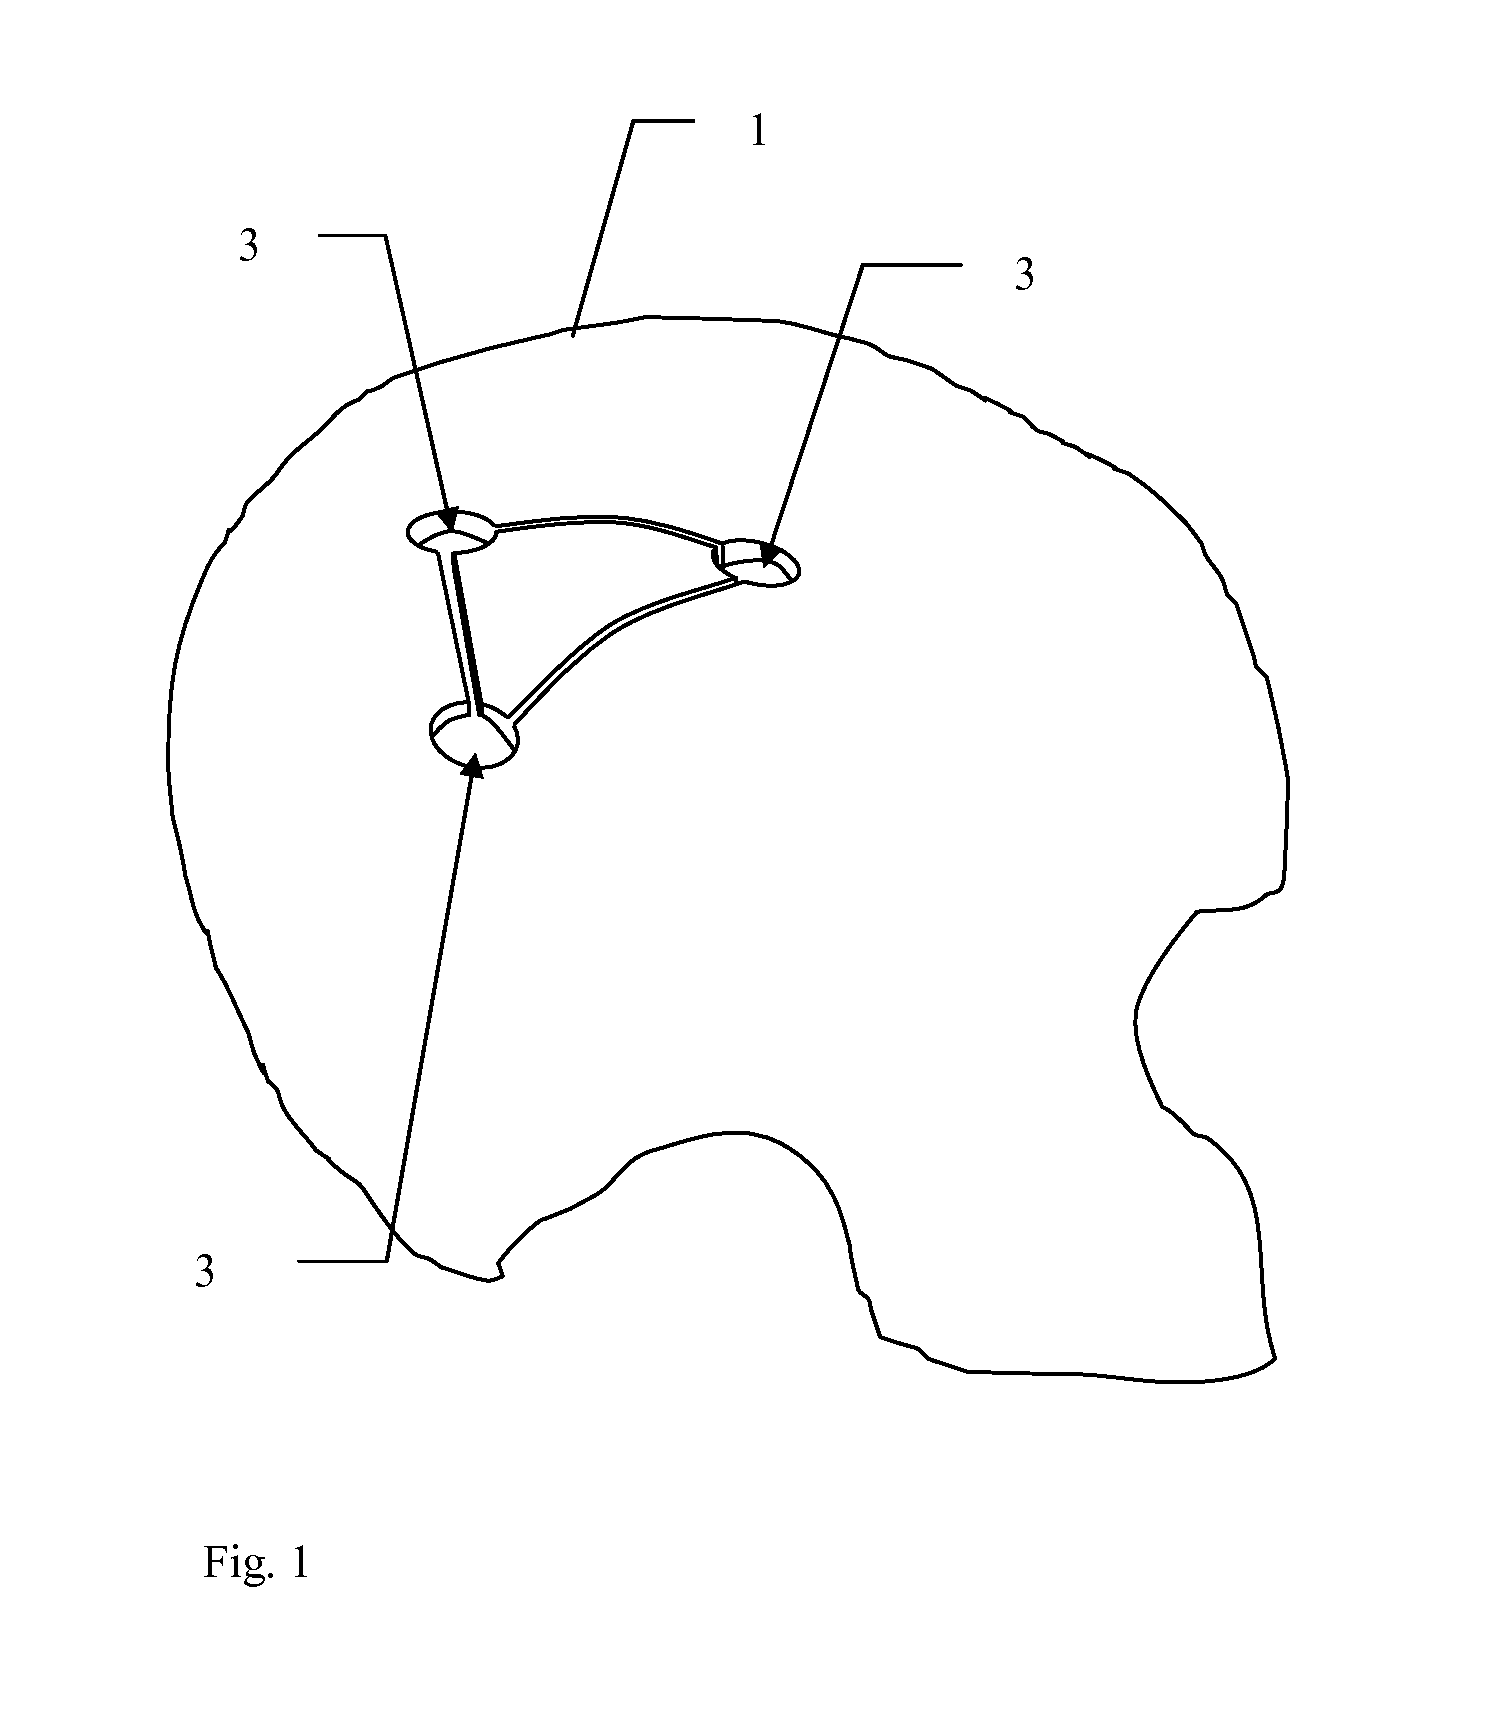 Implants and methods for using such implants to fill holes in bone tissue